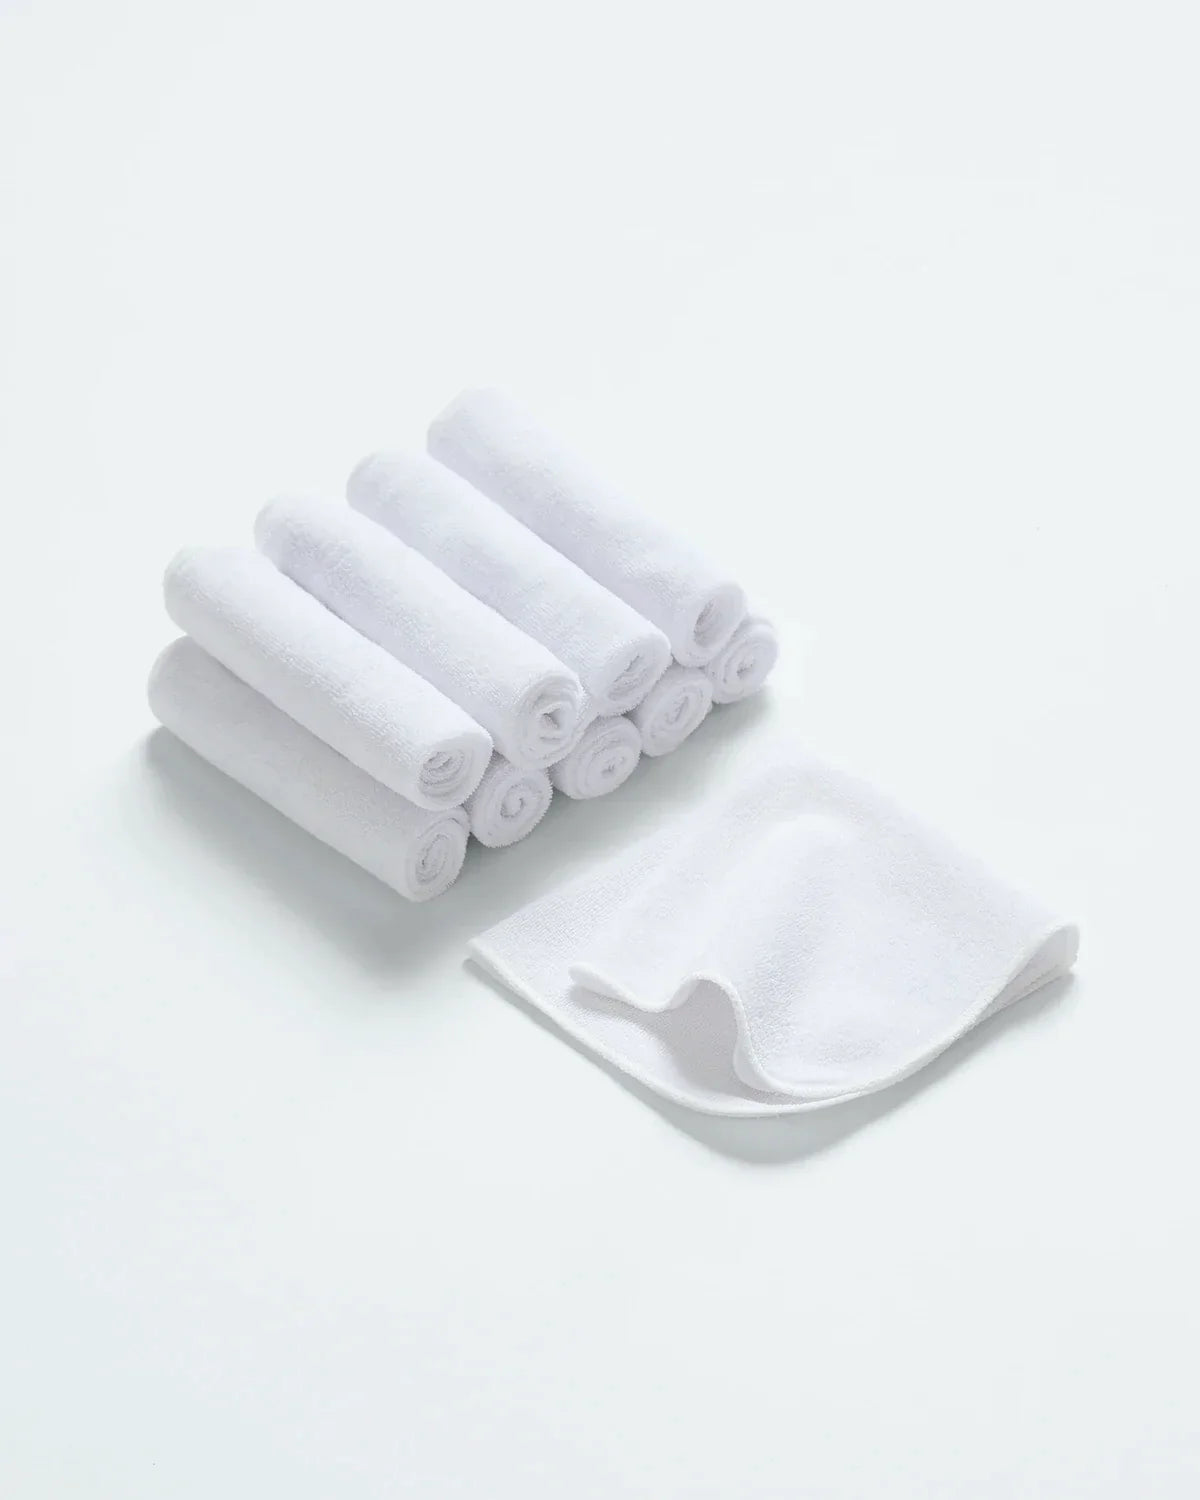 Reusable baby wipes - Everyday